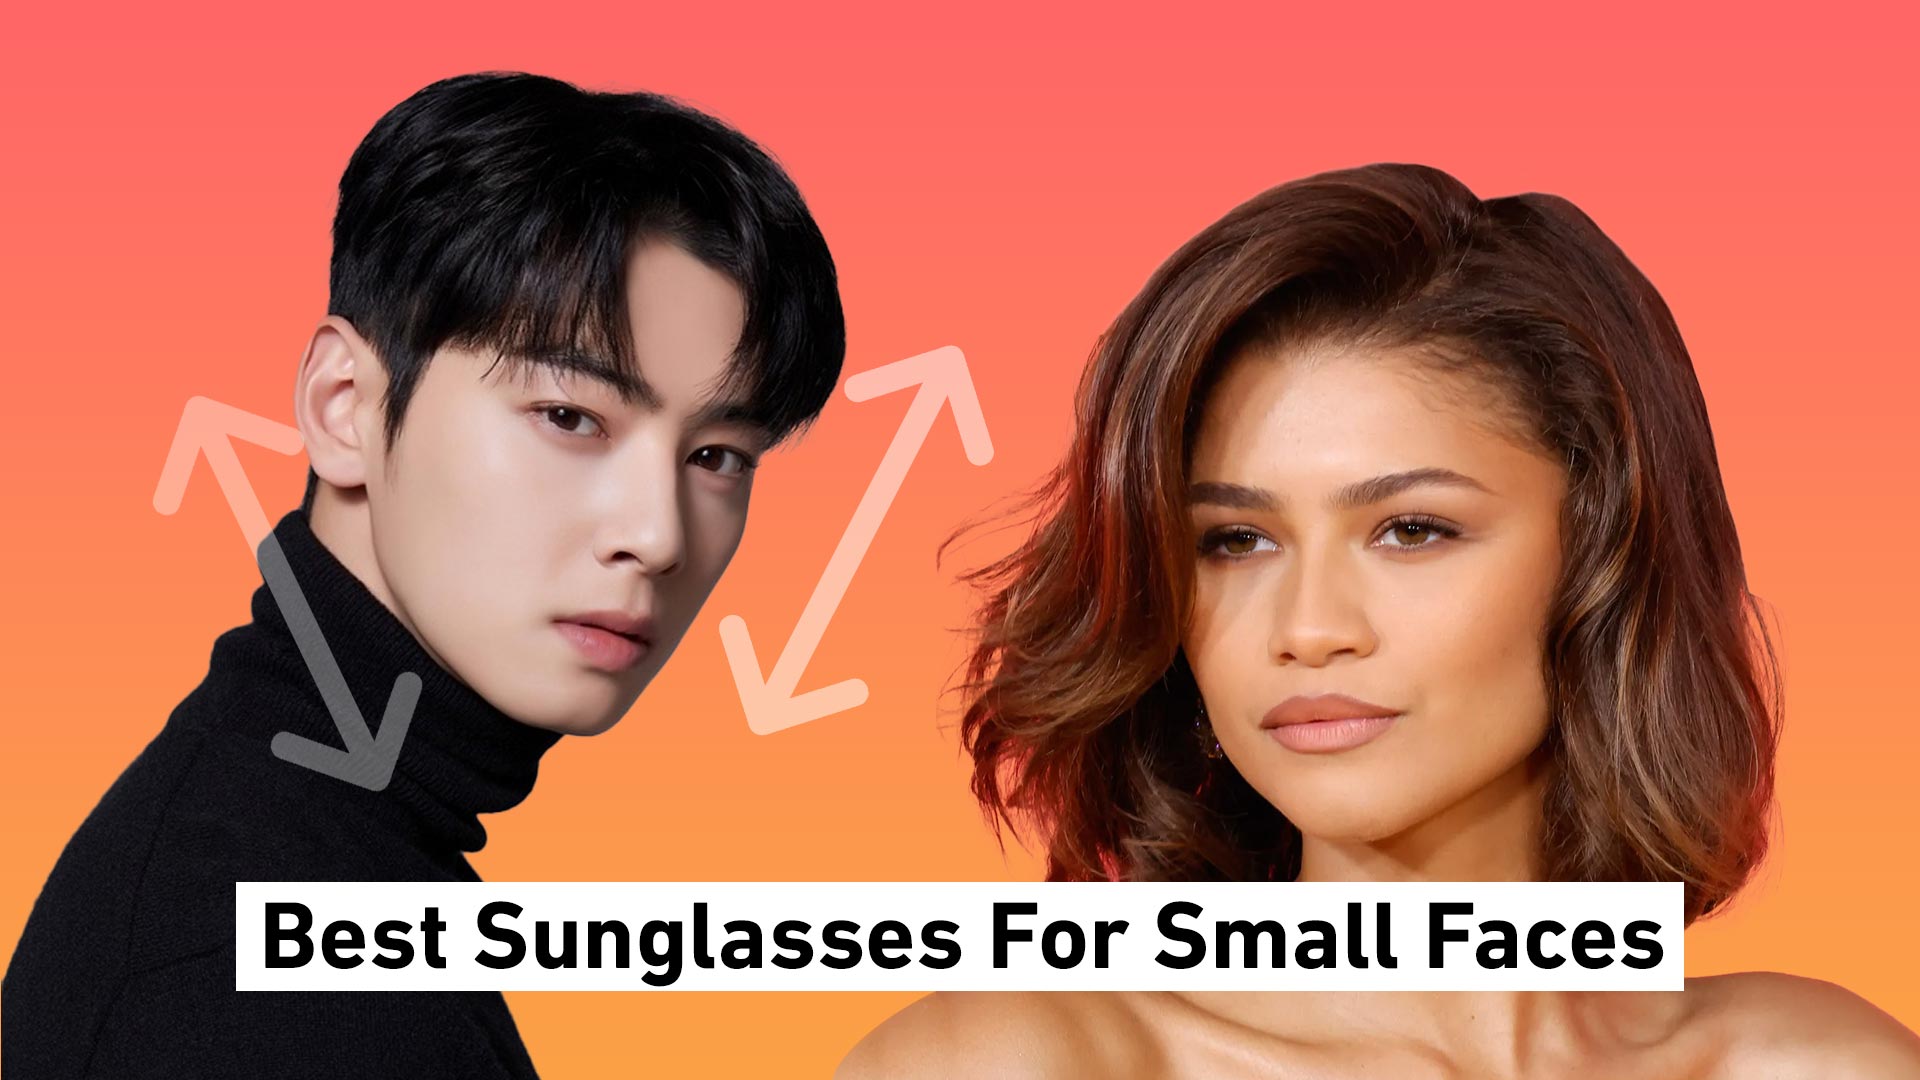 The Best Sunglasses For Small Faces